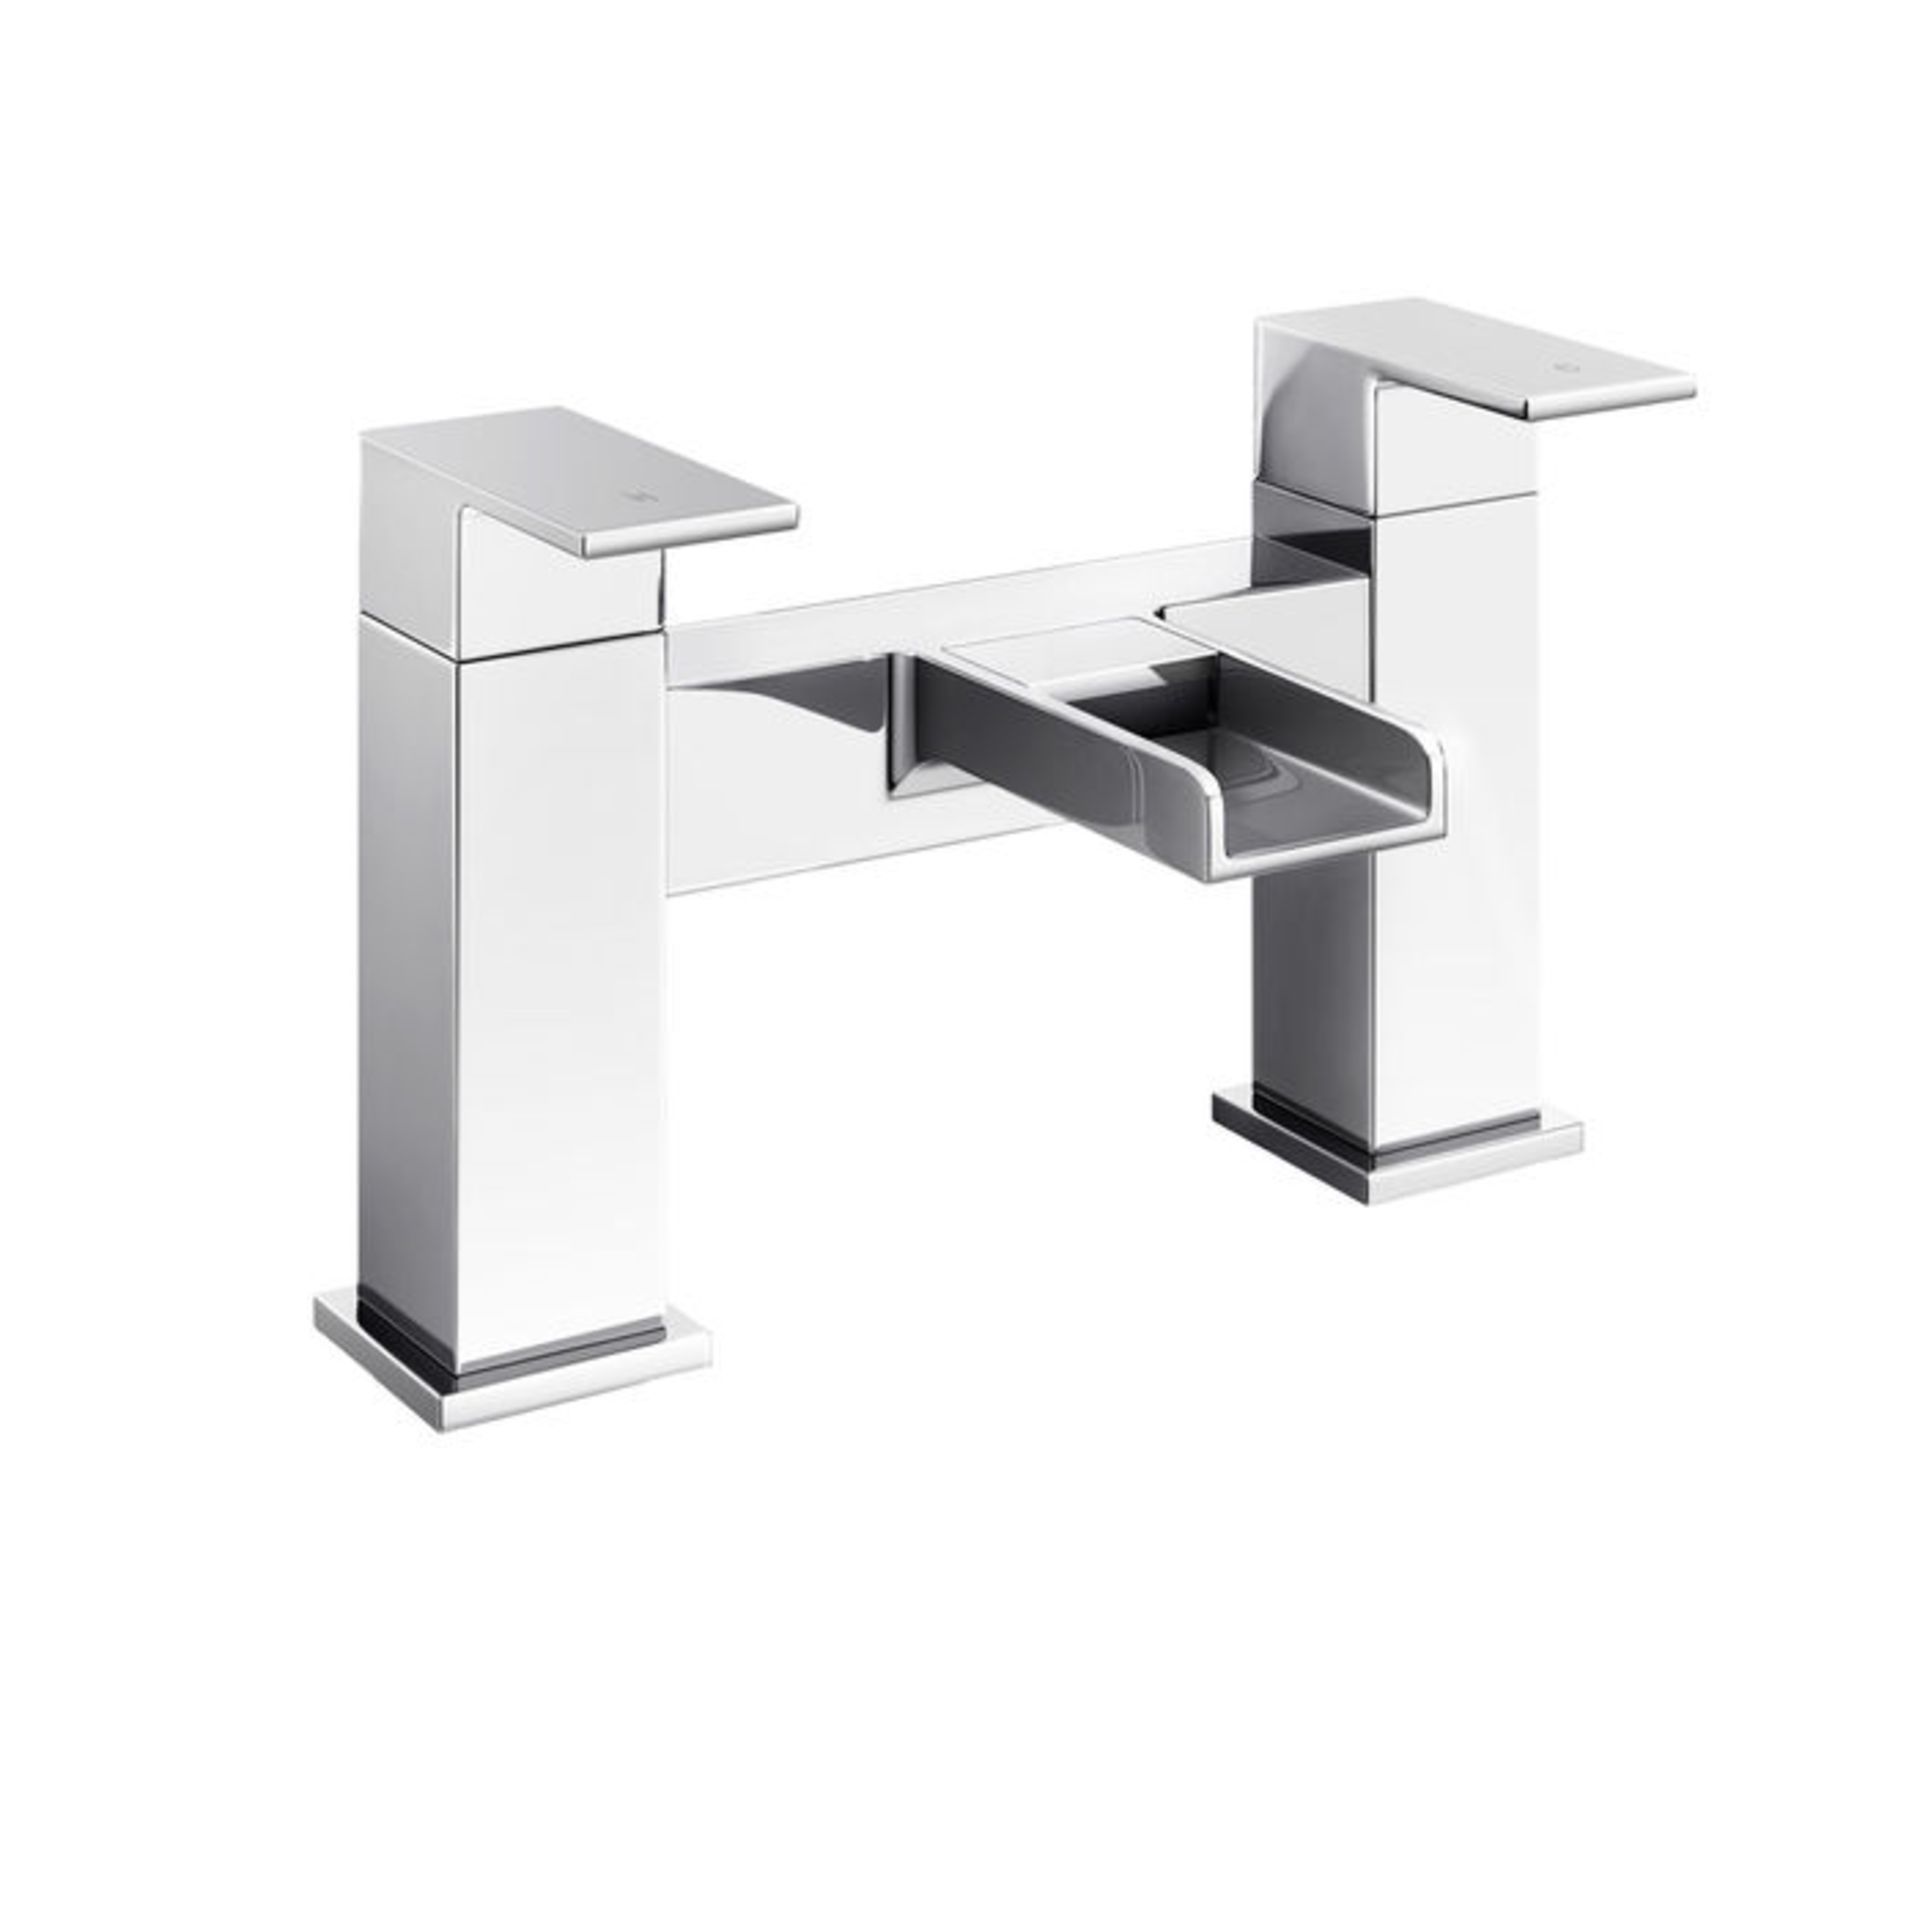 New & Boxed Niagra Waterfall Bath Mixer Taps. Tb3108.Chrome Plated Solid Brass 1/4 Turn Solid - Image 2 of 2